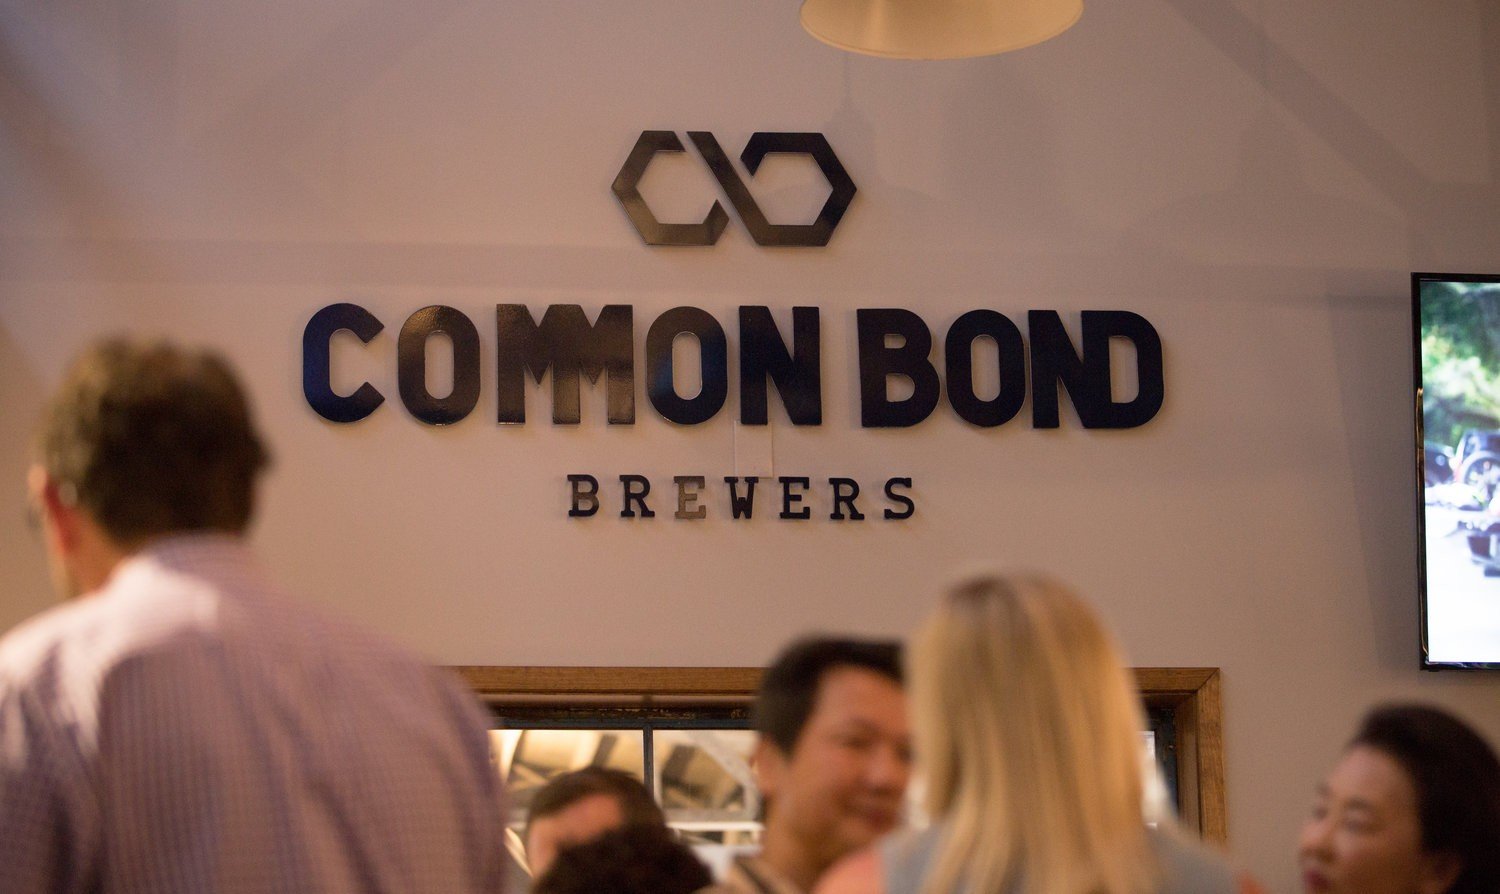 Common Bond Brewers brewery from United States